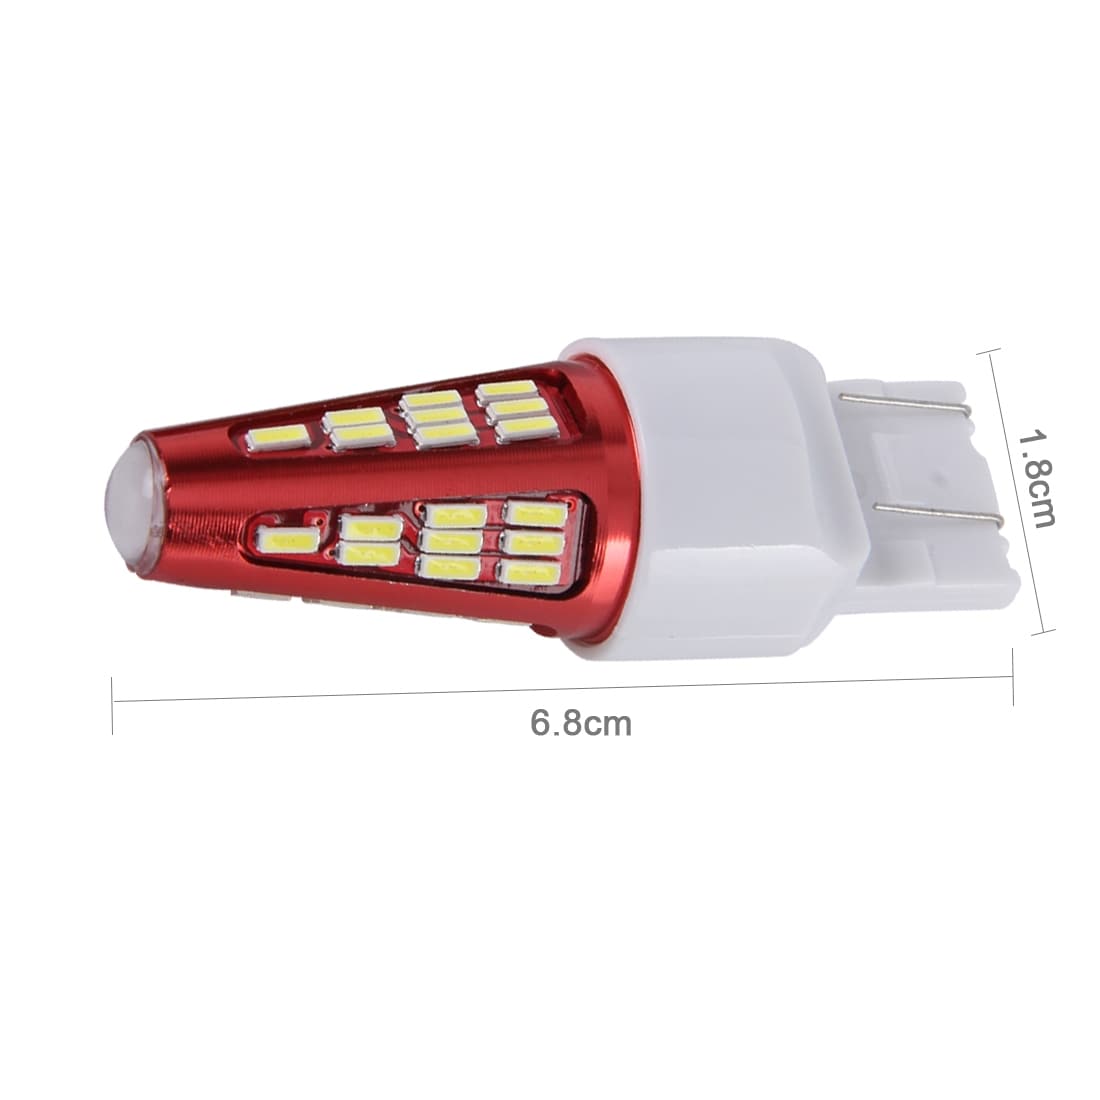 Led lys T20 7443 10W 800LM 6000K 48 SMD-4014 Canbus - 2Pk